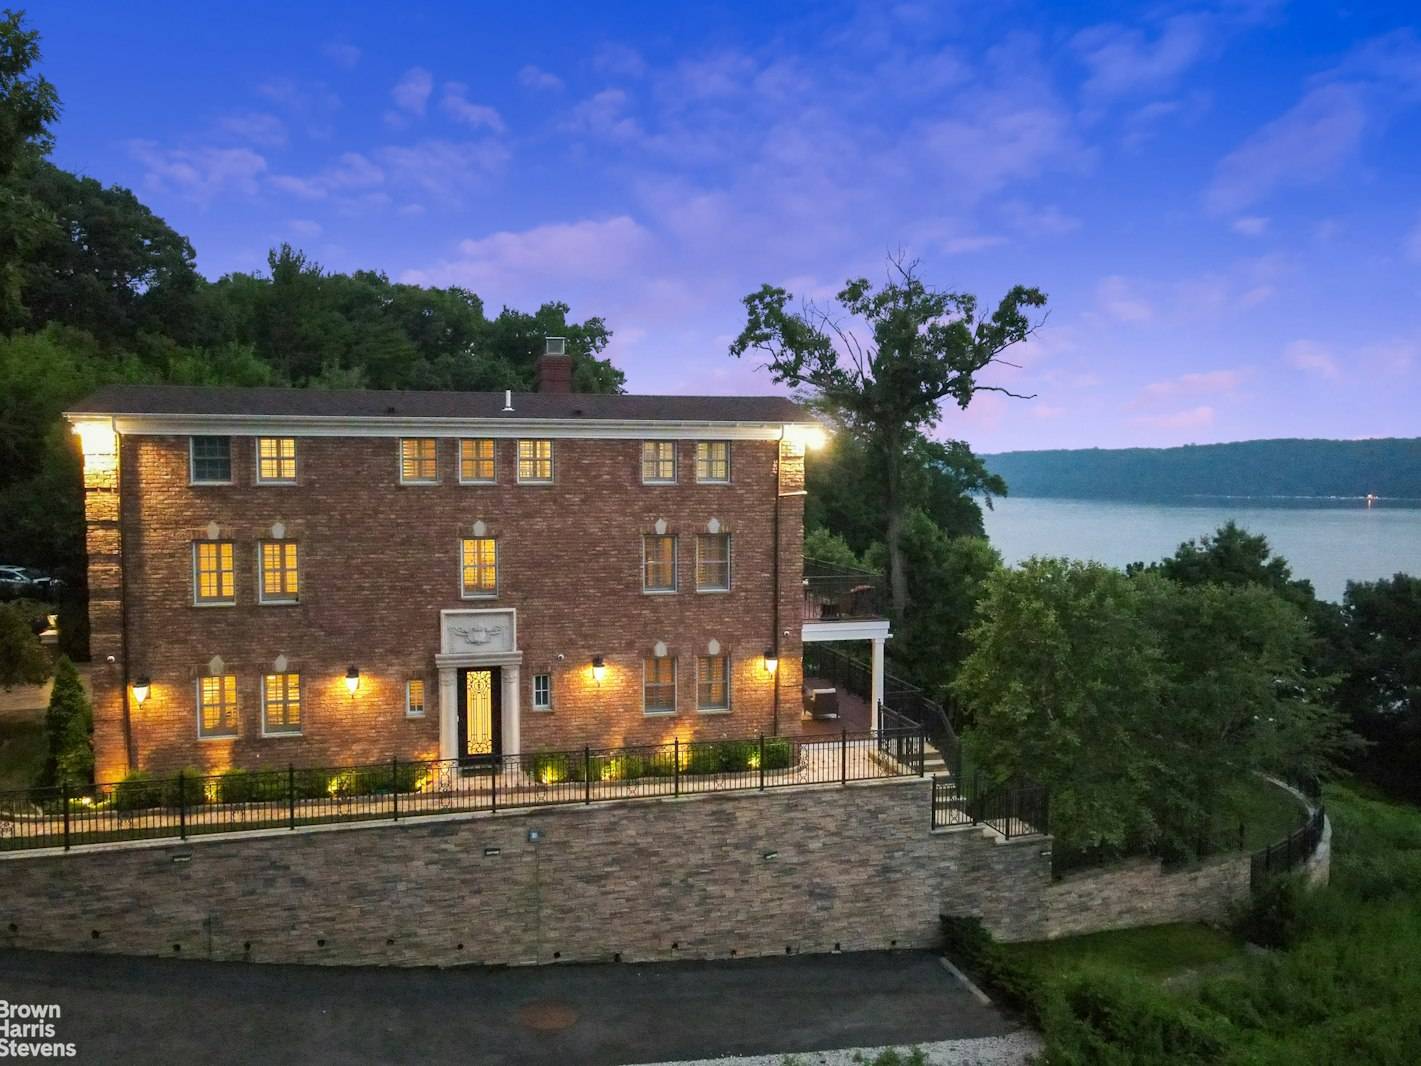 A rare, one of a kind waterfront oasis awaits you in NYC, resting on the cliffs in an exclusive enclave in the Spuyten Duyvil section of Riverdale, overlooking the Hudson ...